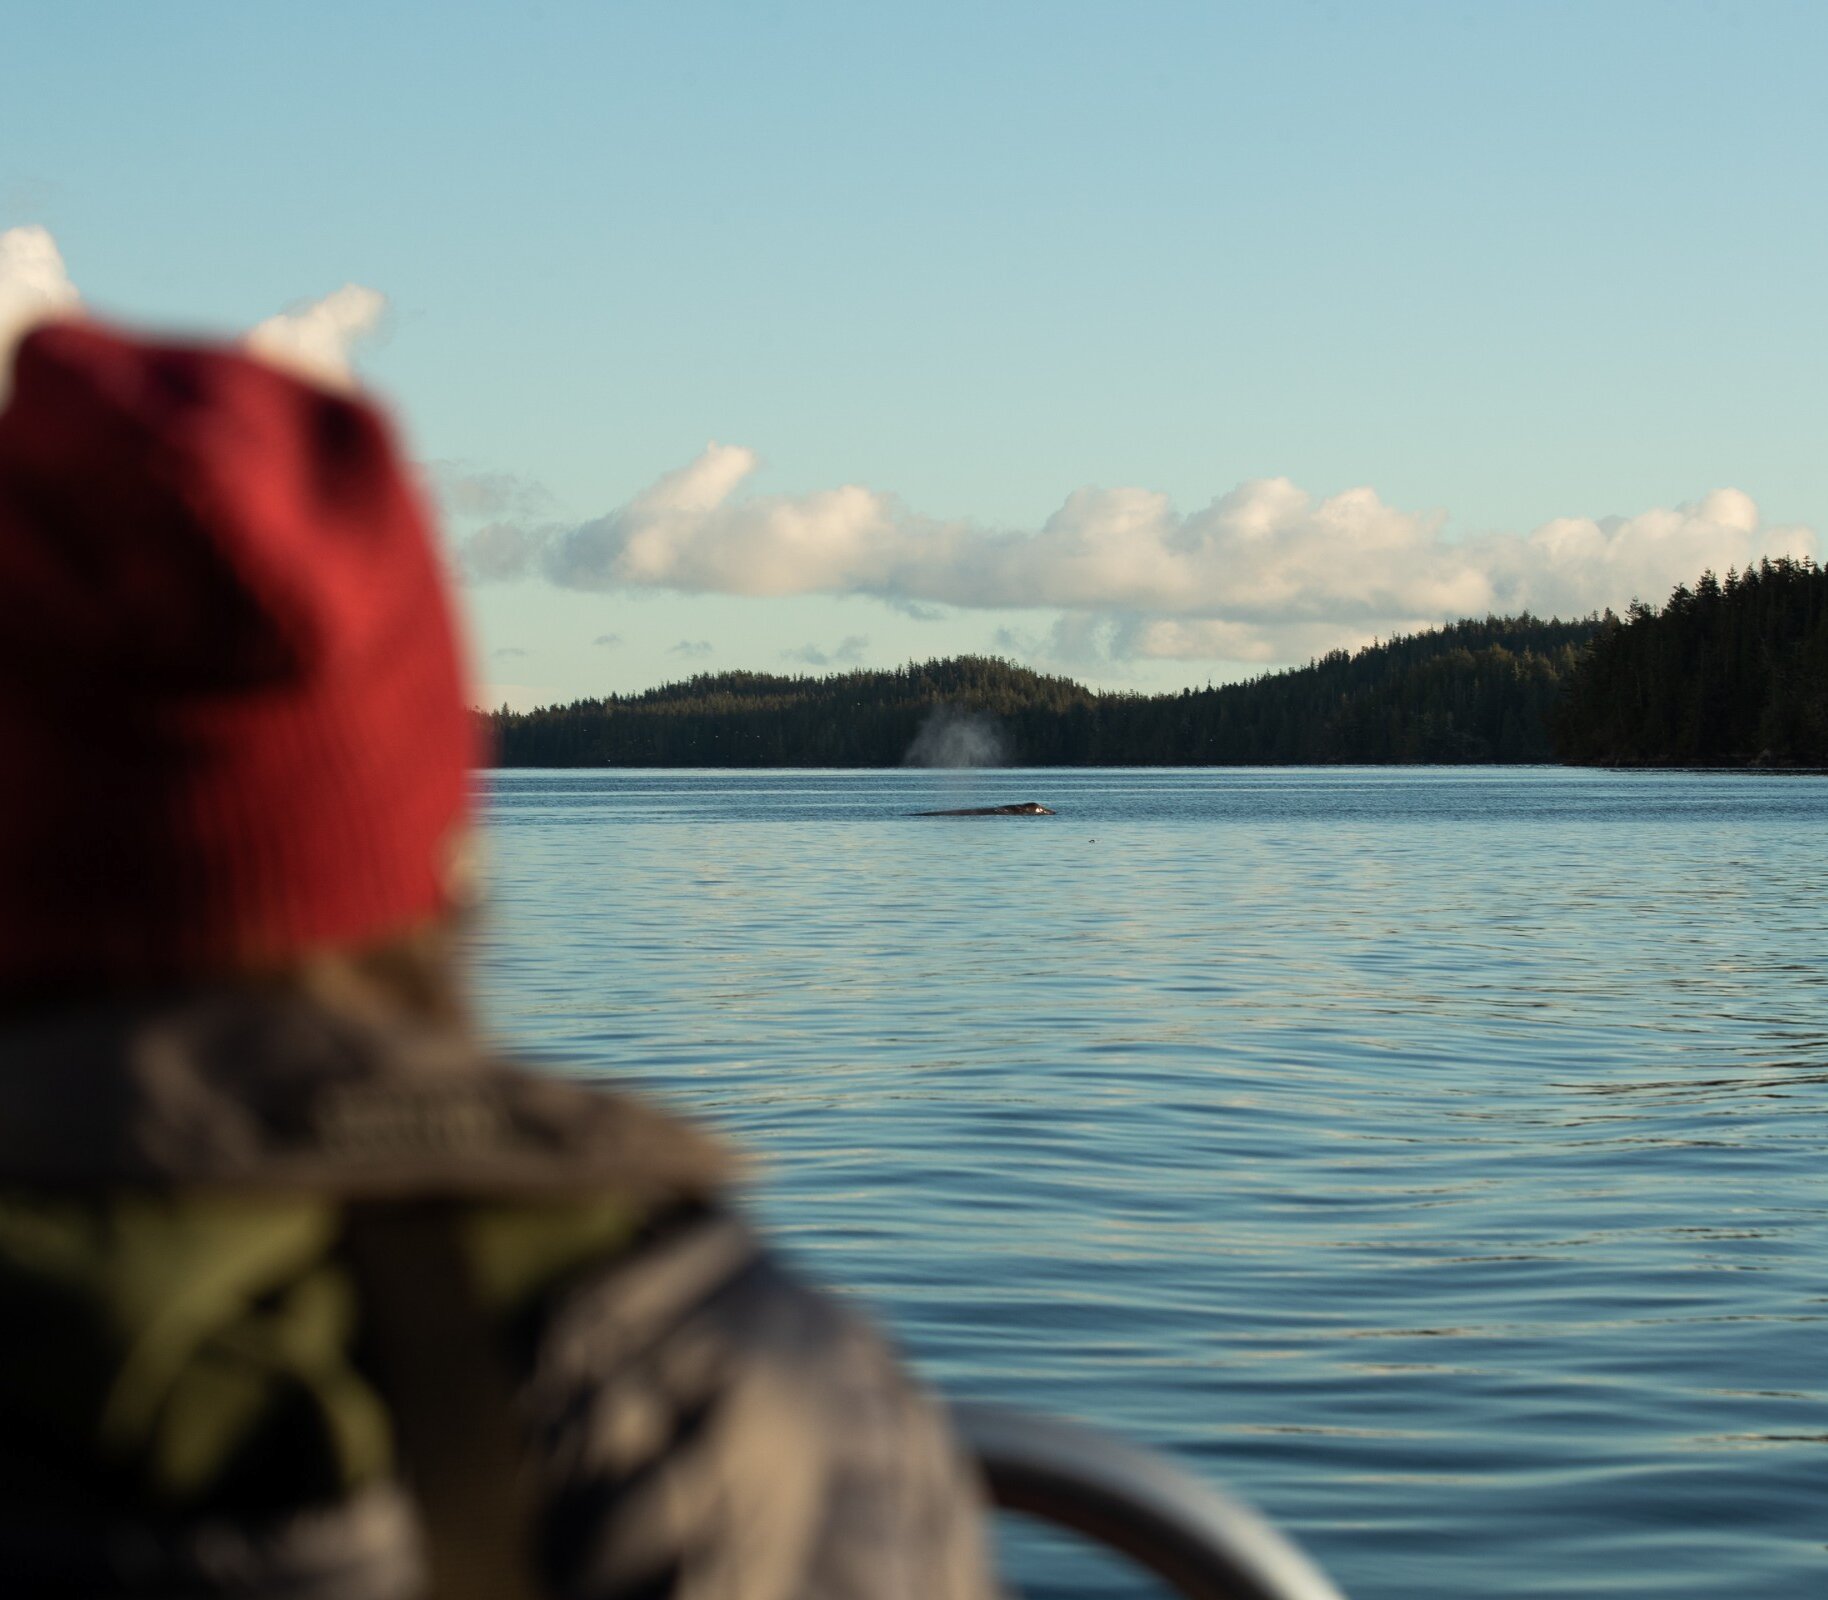 Looking over the shoulder of a person watching a Humpback whale in the distance